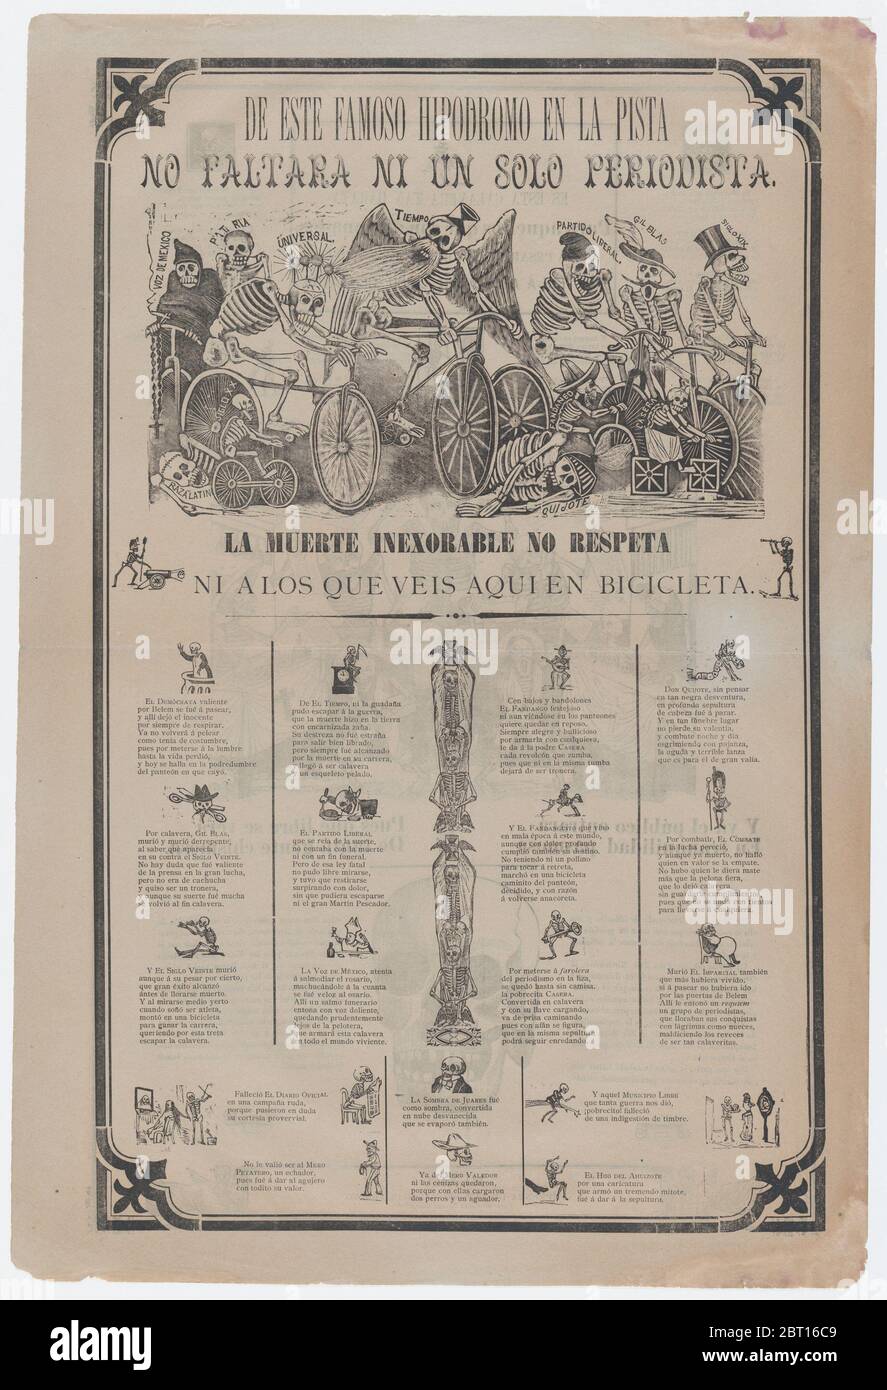 Broadsheet, on recto skeletons riding bicycles entitled 'From this famous hippodrome on the racetrack, not even a single journalist is missing. Death is inexorable and doesn't even respect those that you see here on bicycle'; on verso skeletons buying and selling printed images etc, ca. 1900. Stock Photo